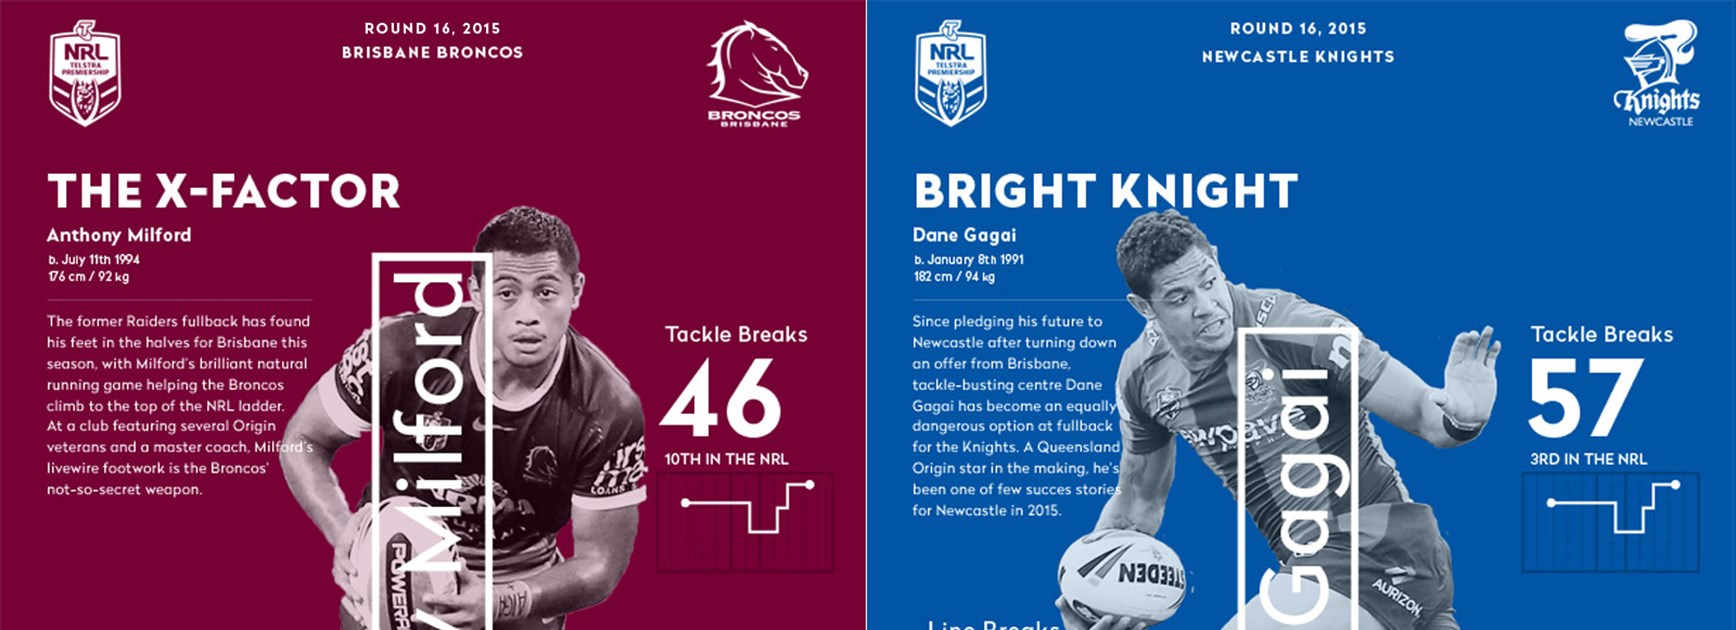 Friday night's clash will feature two of the NRL's most electrifying ball-runners, Anthony Milford and Dane Gagai.